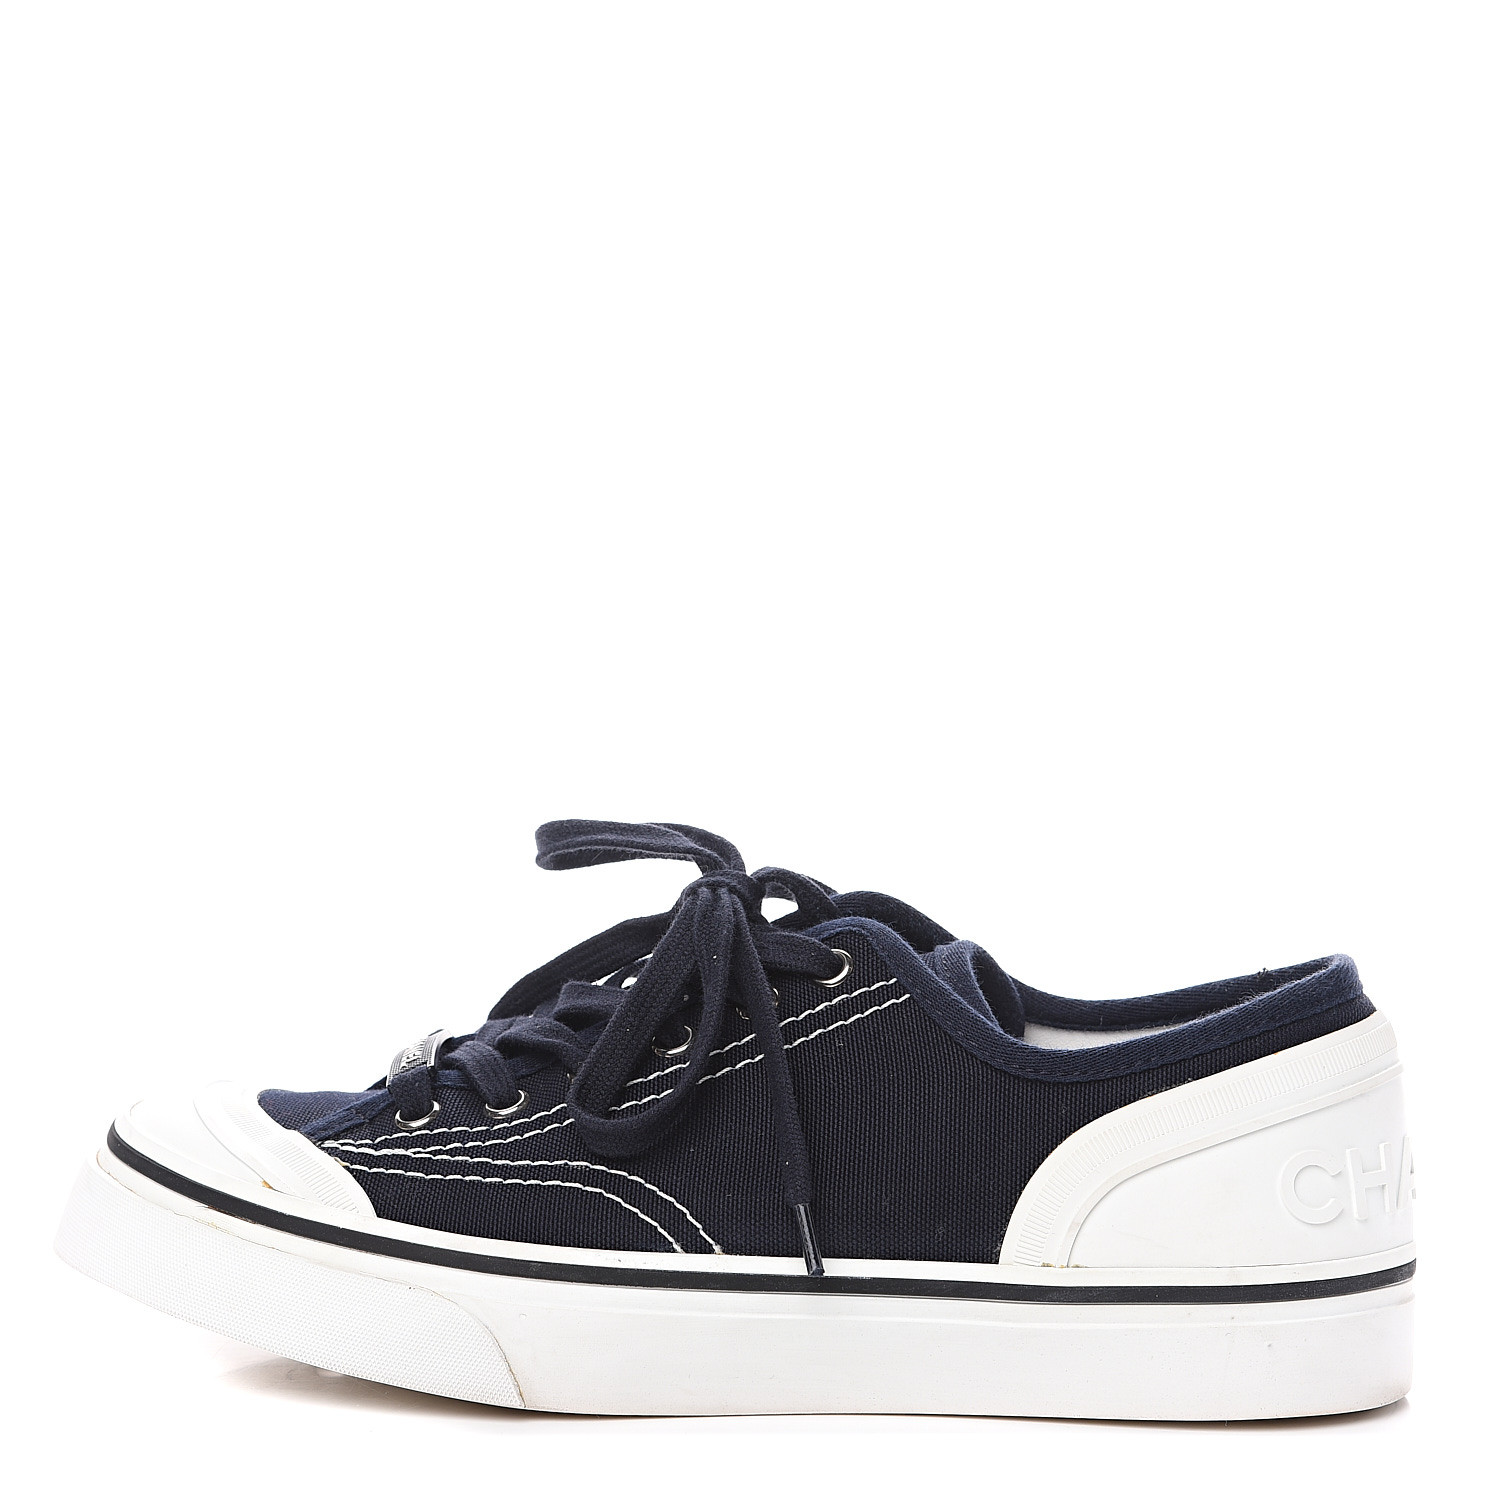 CHANEL Canvas Lace Up Cap Toe Sneakers 